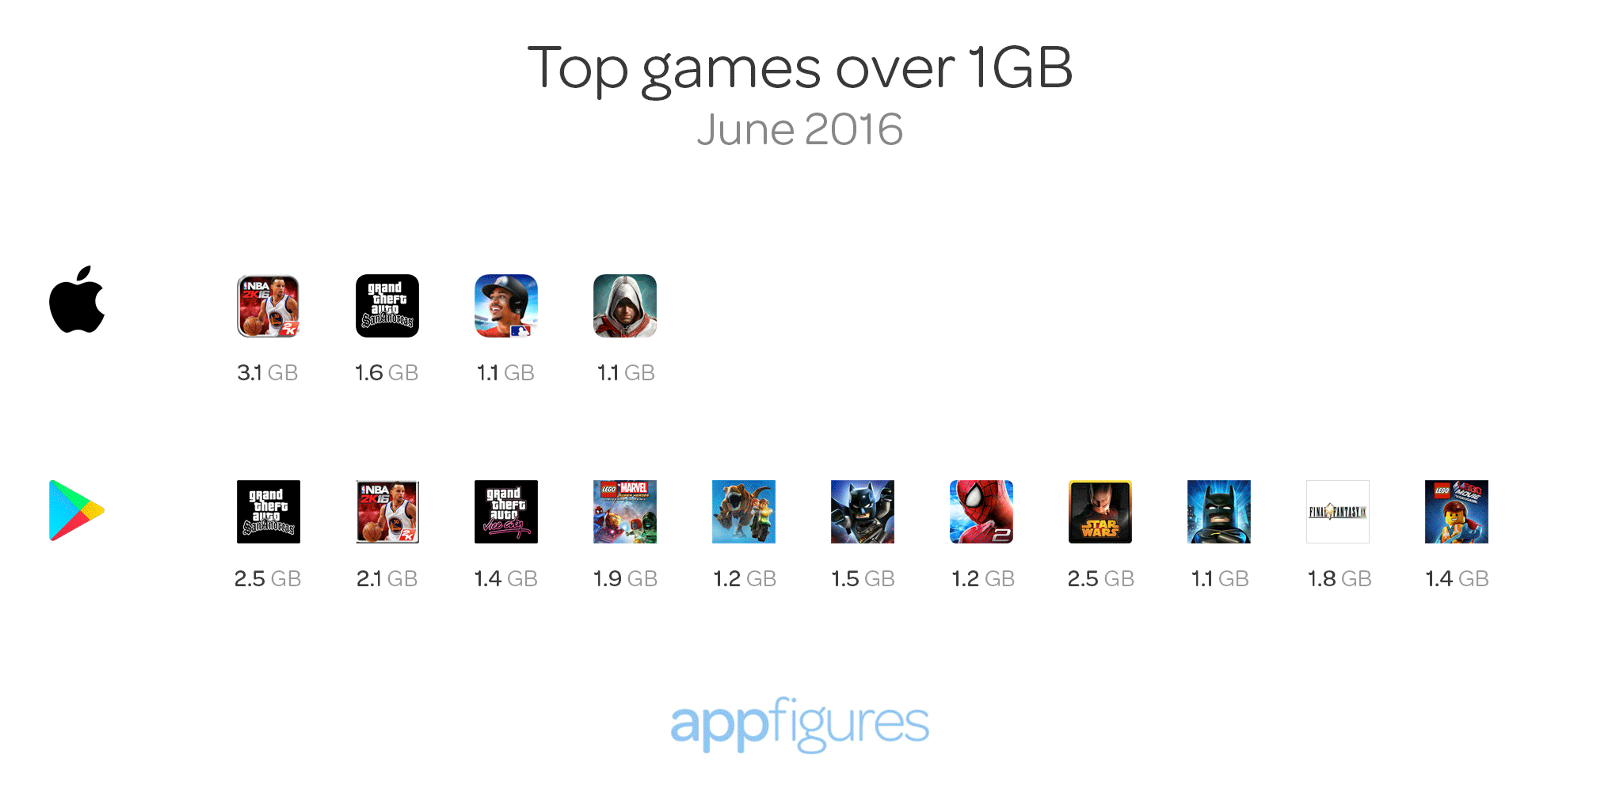 Top ranked iOS and Android games that are over 1GB in size - App store insights by appFigures